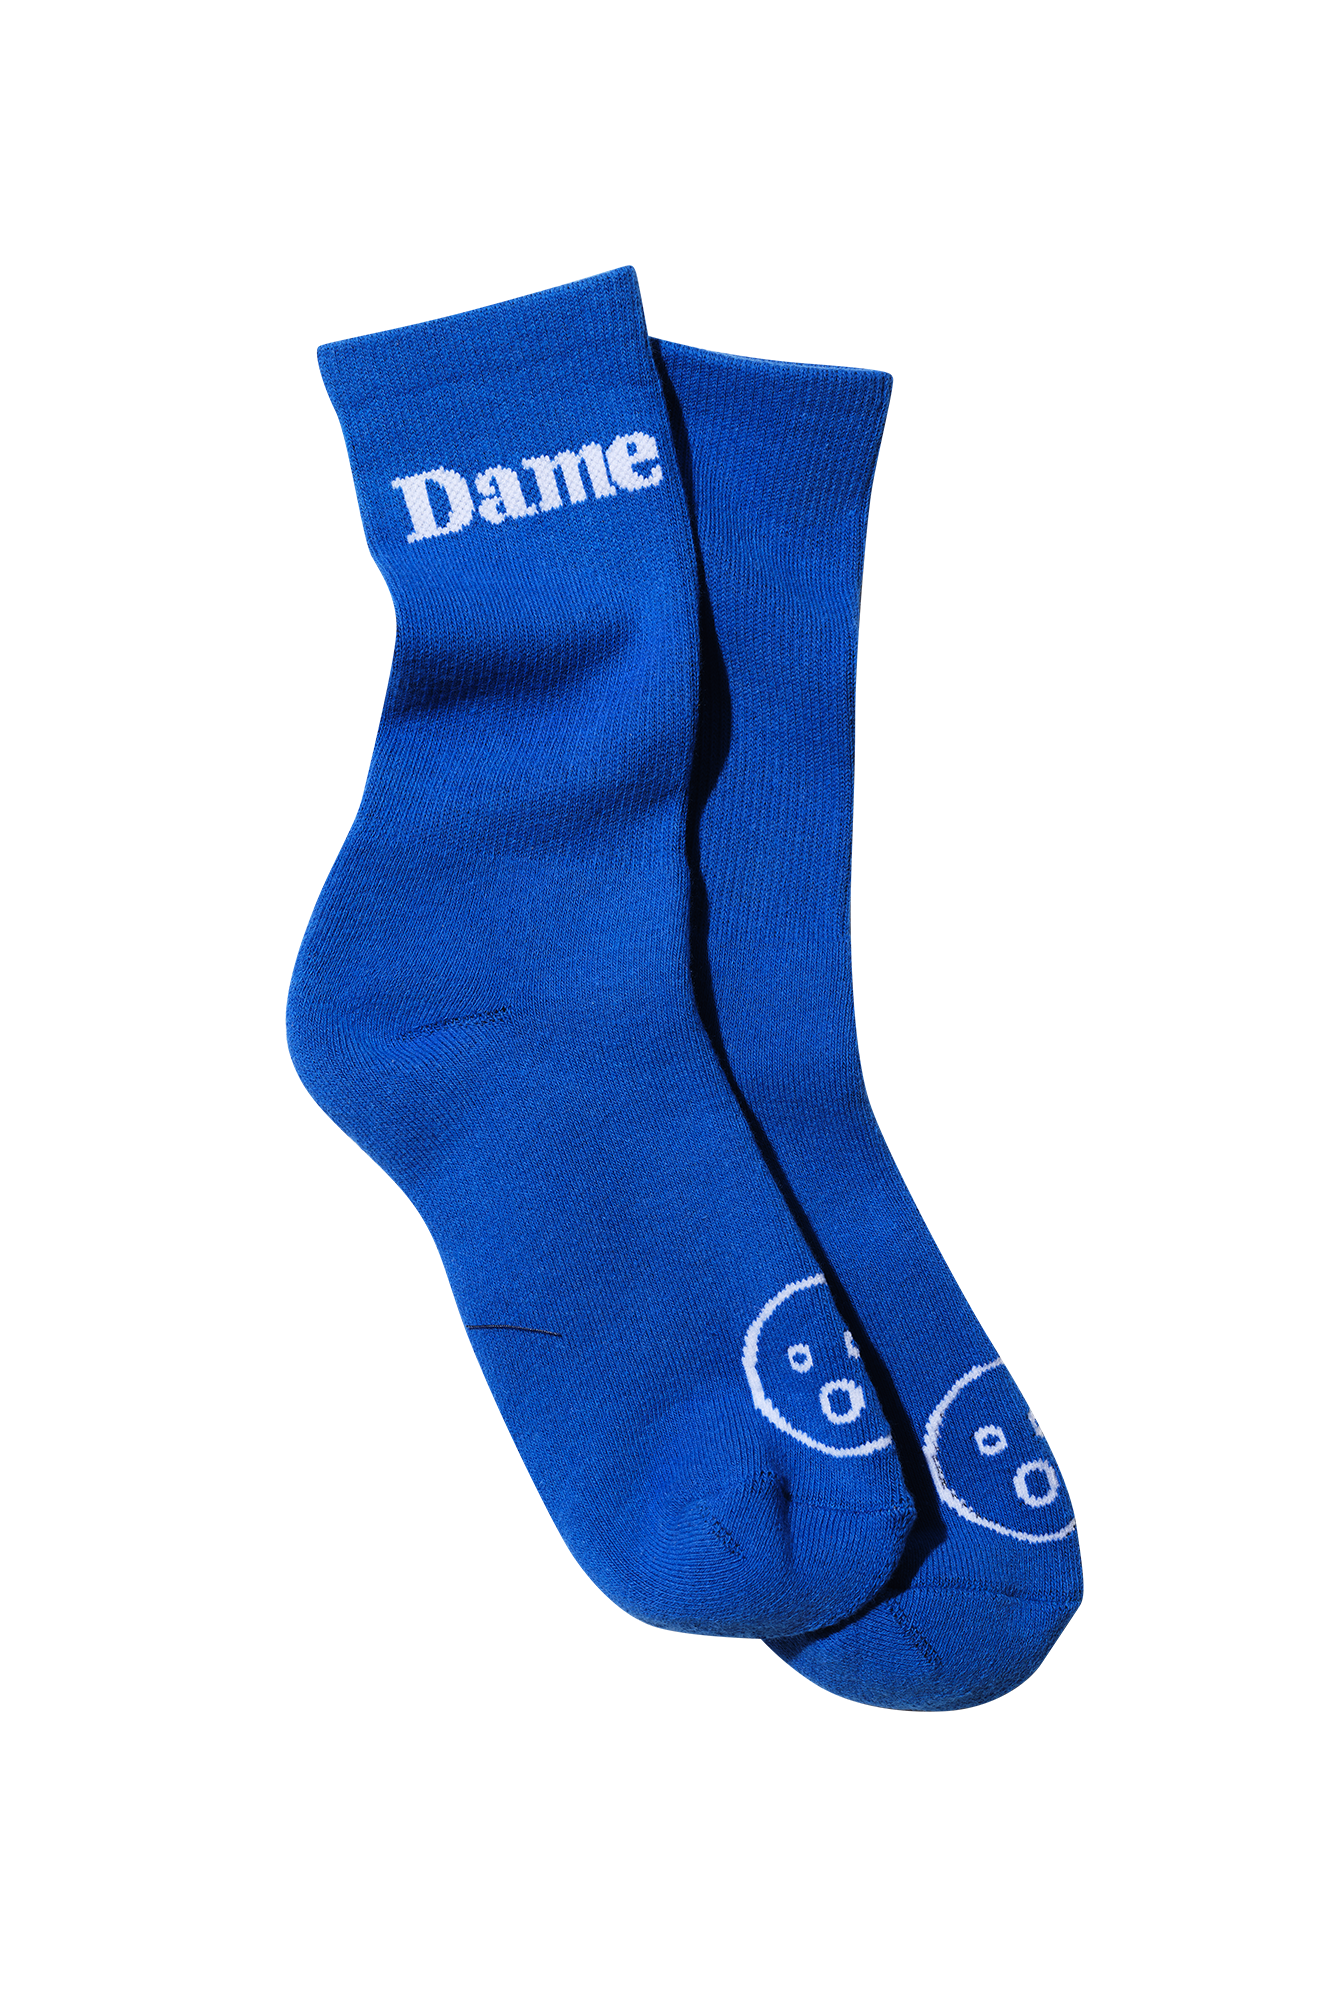 Dame Socks | Two pairs of legs, entangled, all wearing bright blue Dame Socks.